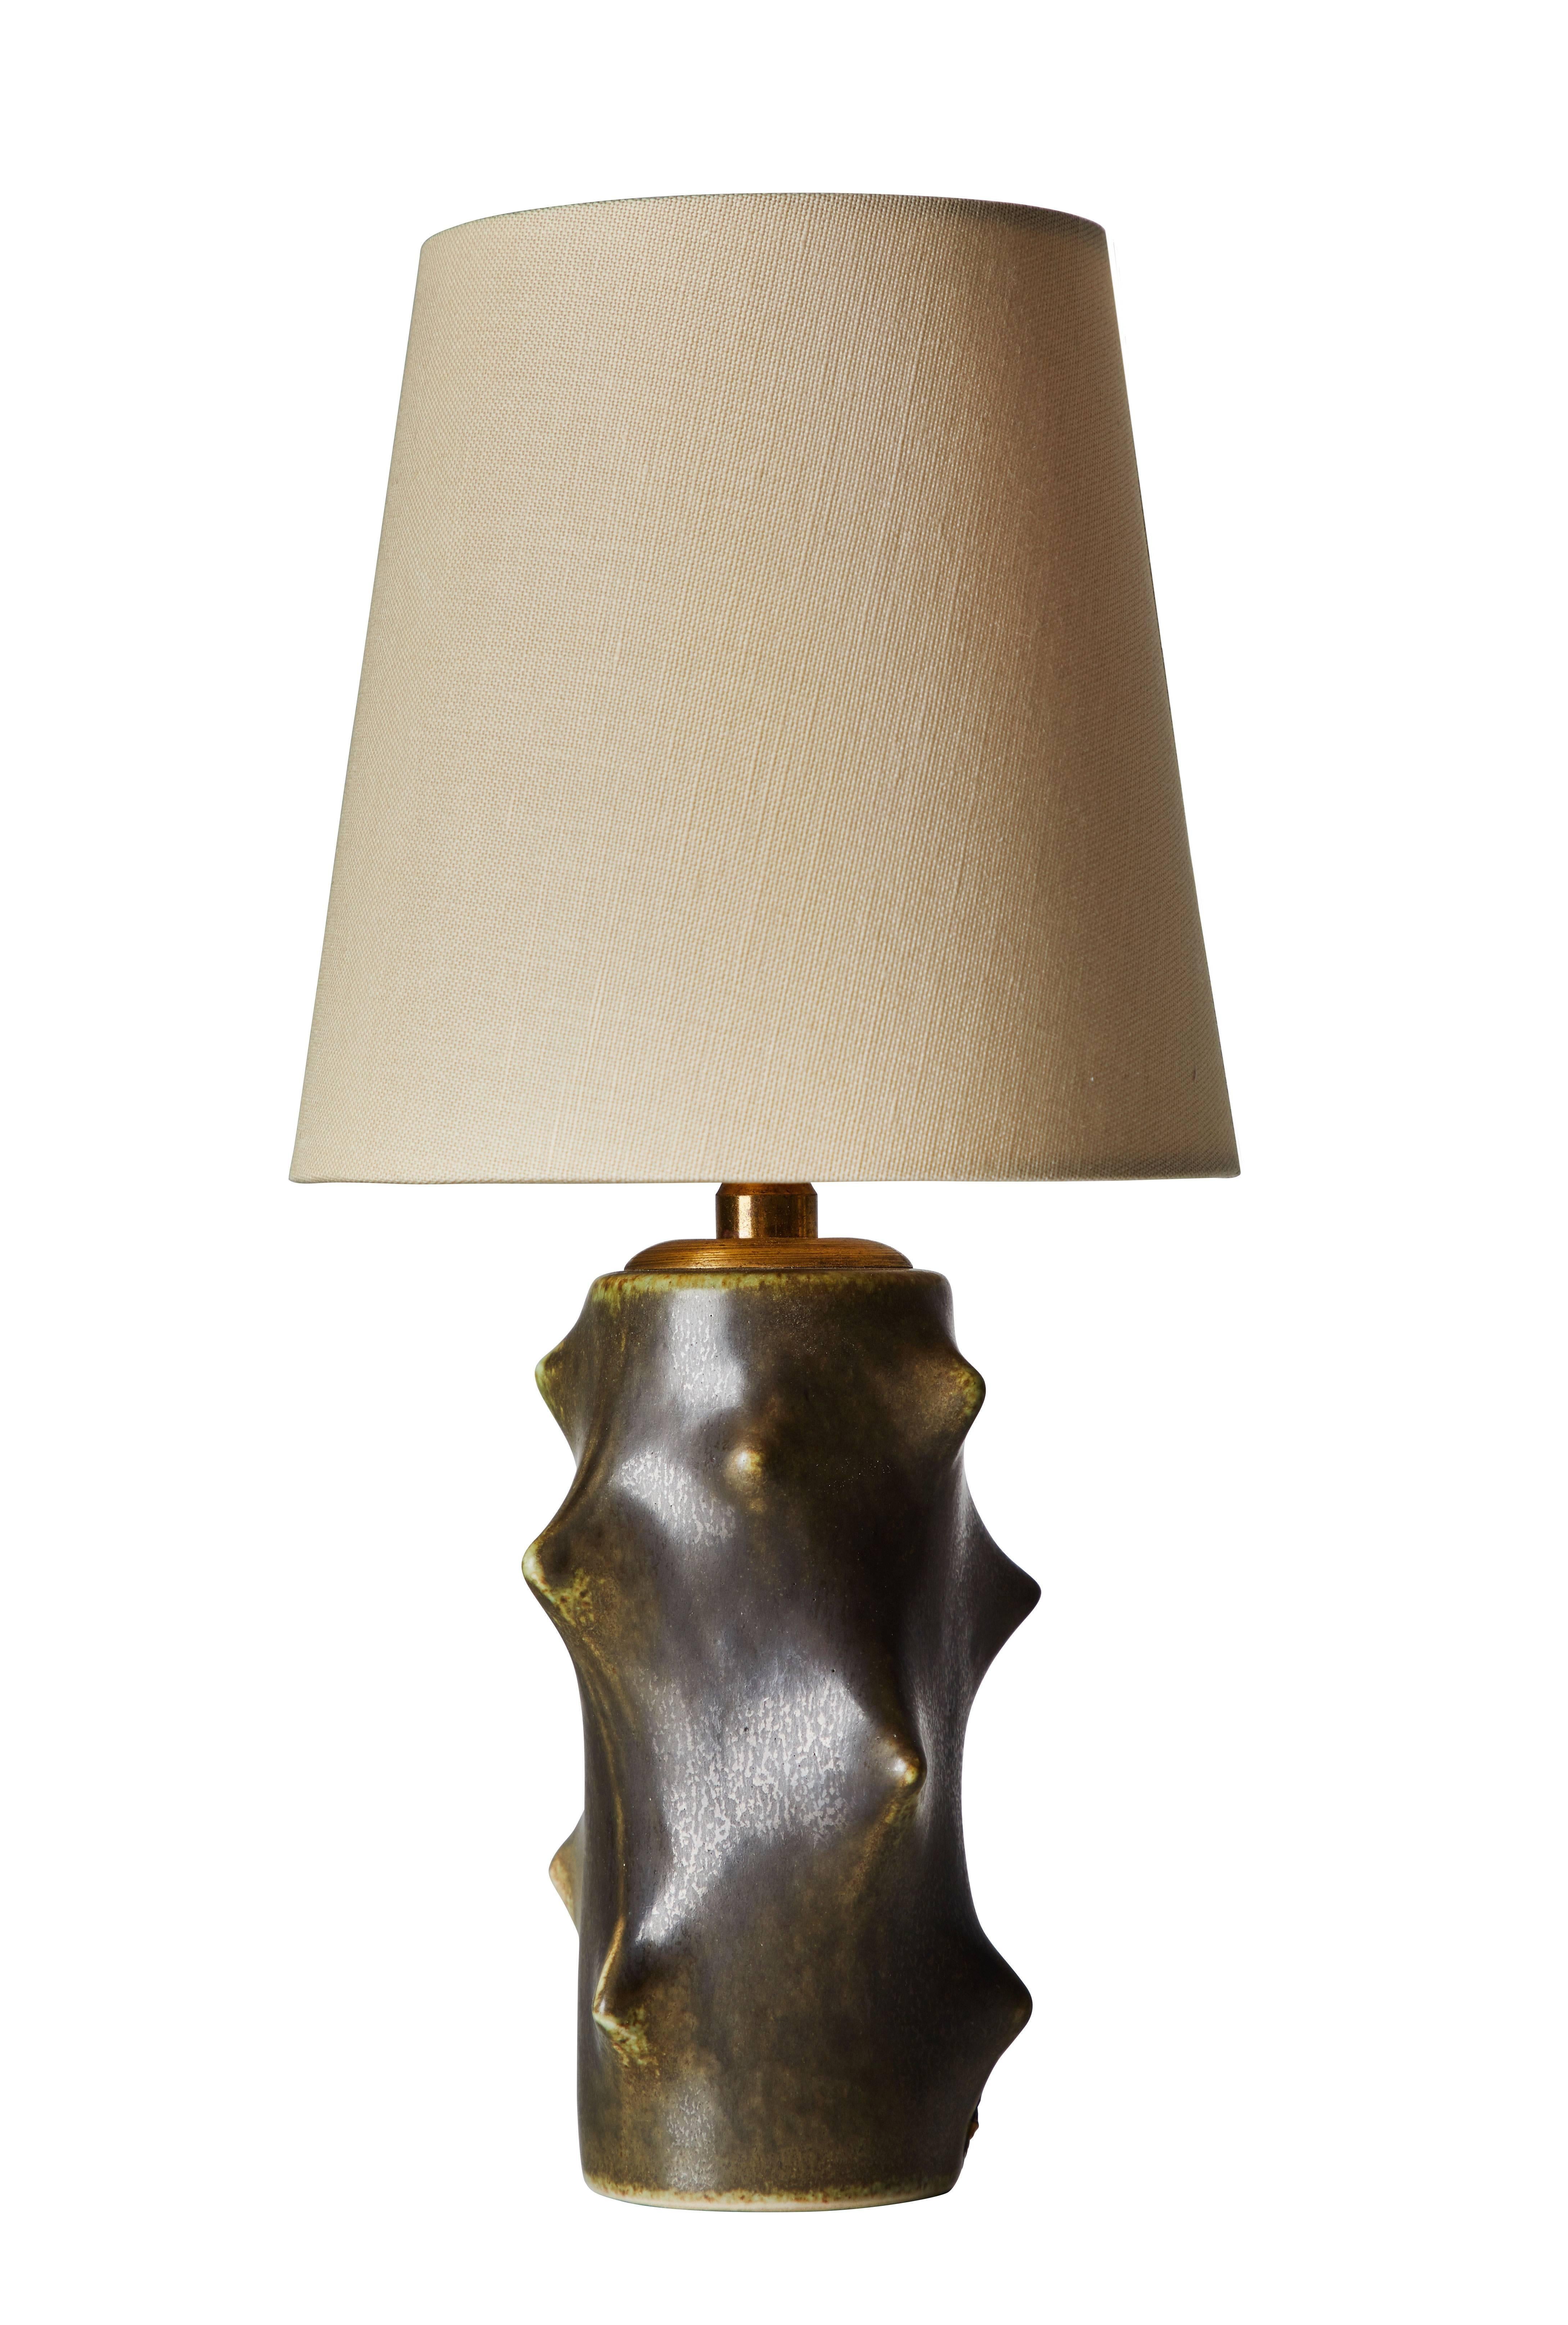 Ceramic table lamp by Michael Andersen and Son for Knud Basse. Designed and manufactured in Denmark circa 1960s. Custom linen shade included. Original cord. Retains original manufacturer’s label. Shade is 7 inches height, 7.25 inches in